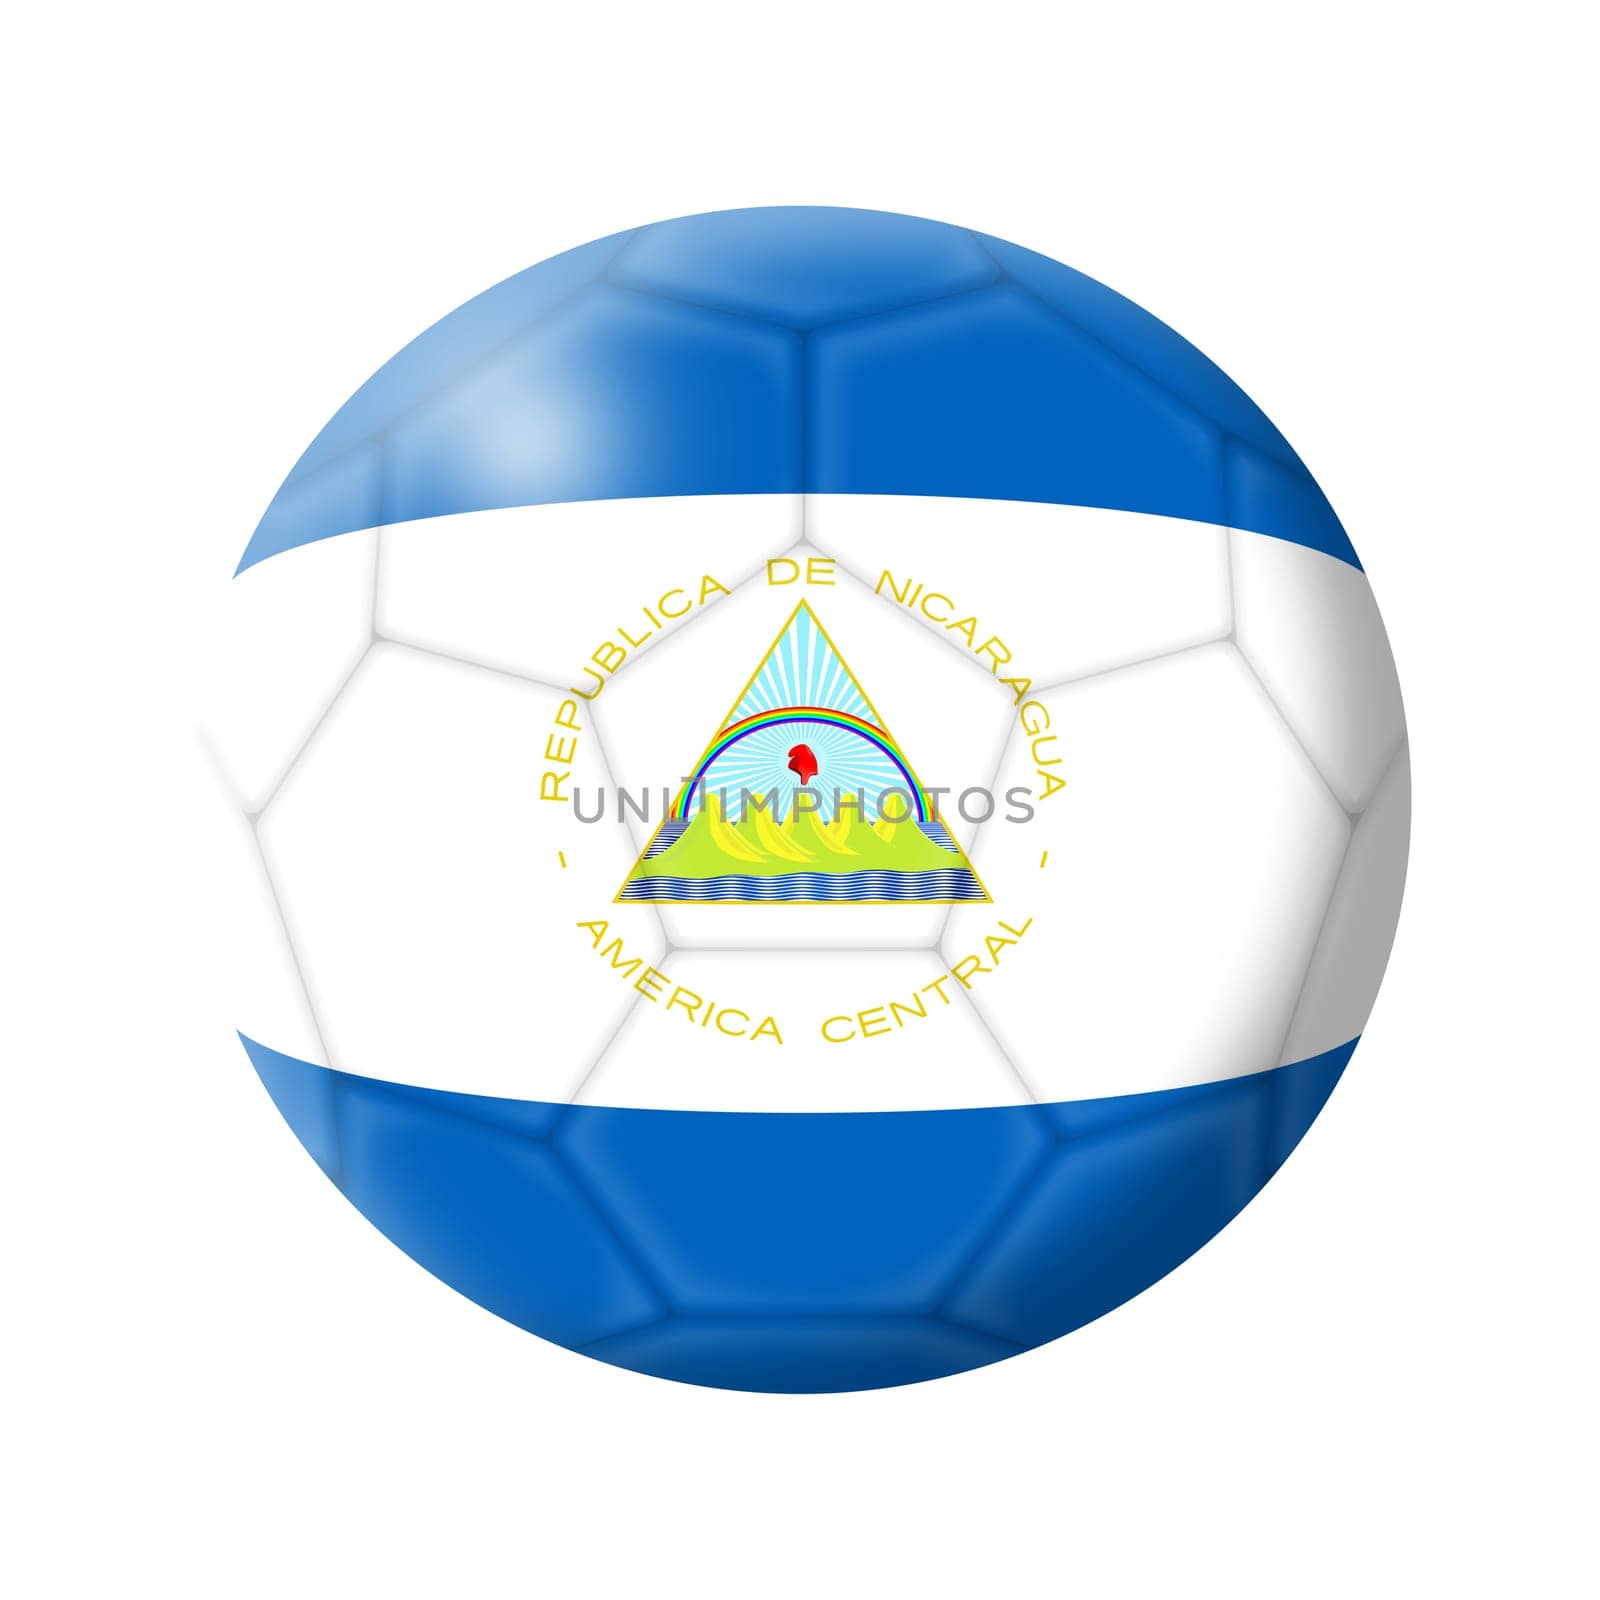 A Nicaragua soccer ball football 3d illustration isolated on white with clipping path